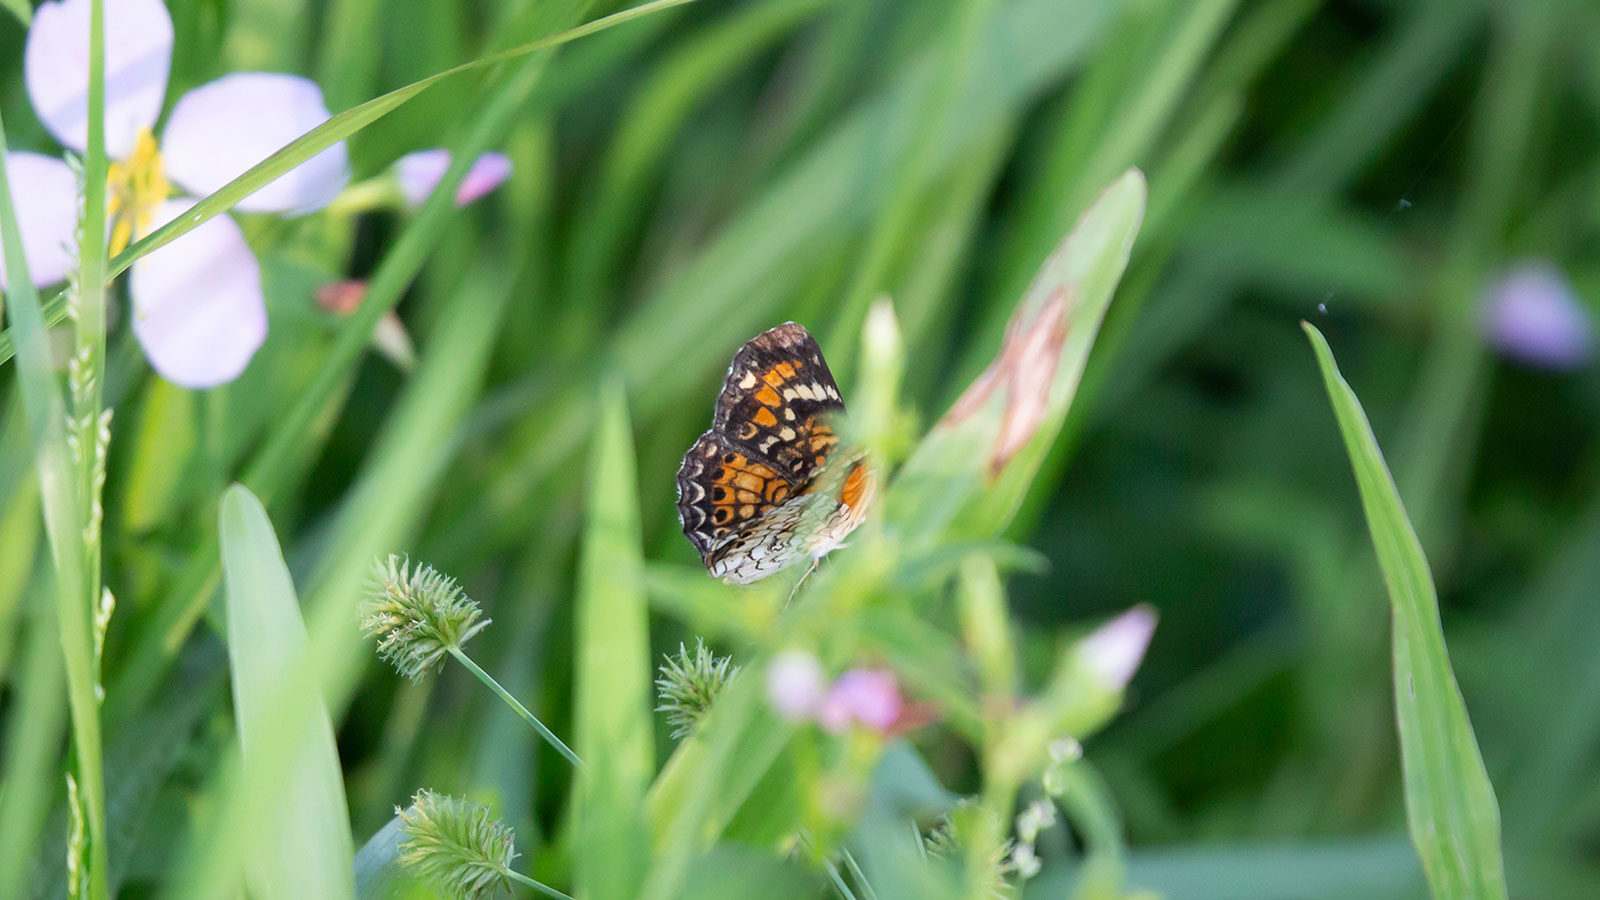 Phaon crescent butterfly on a blade of grass